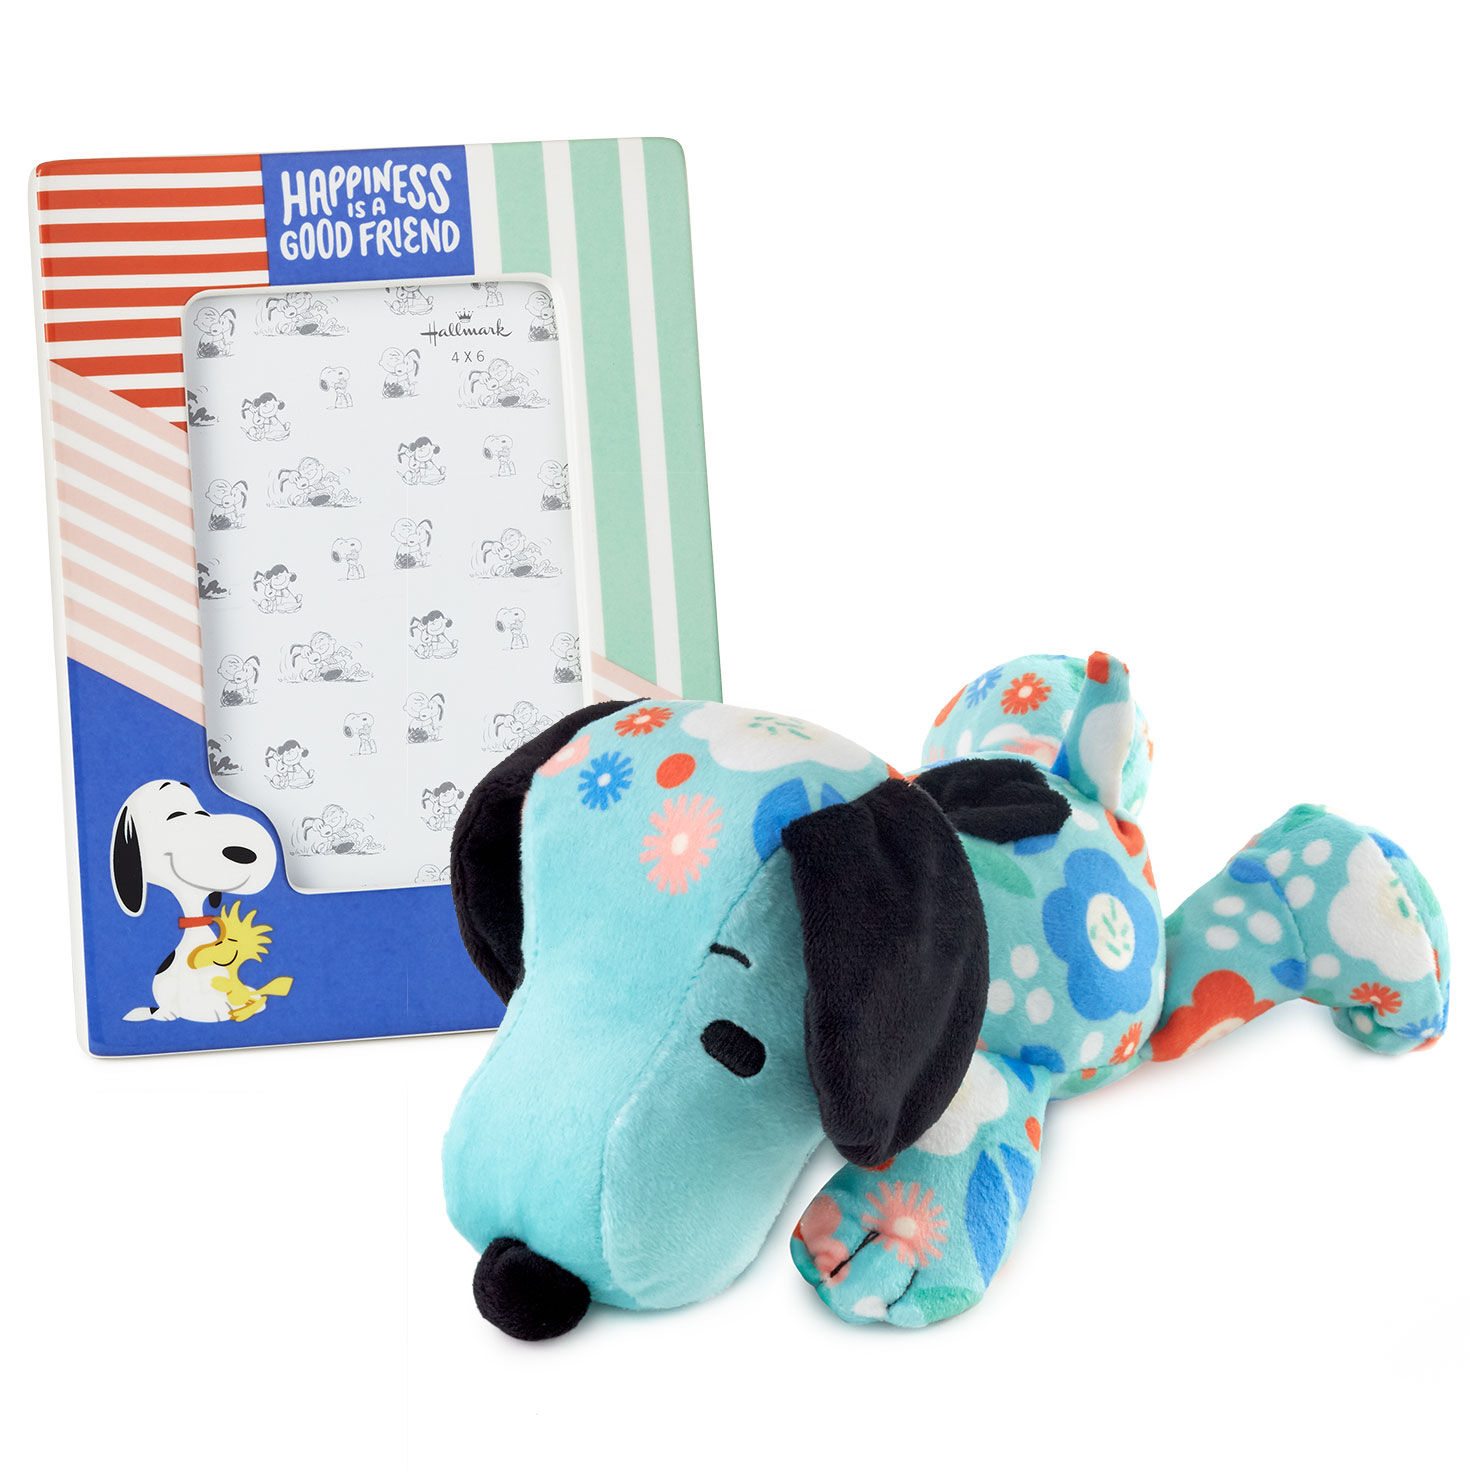 Peanuts® Snoopy Friendship and Flowers Gift Set for only USD 16.99-26.99 | Hallmark